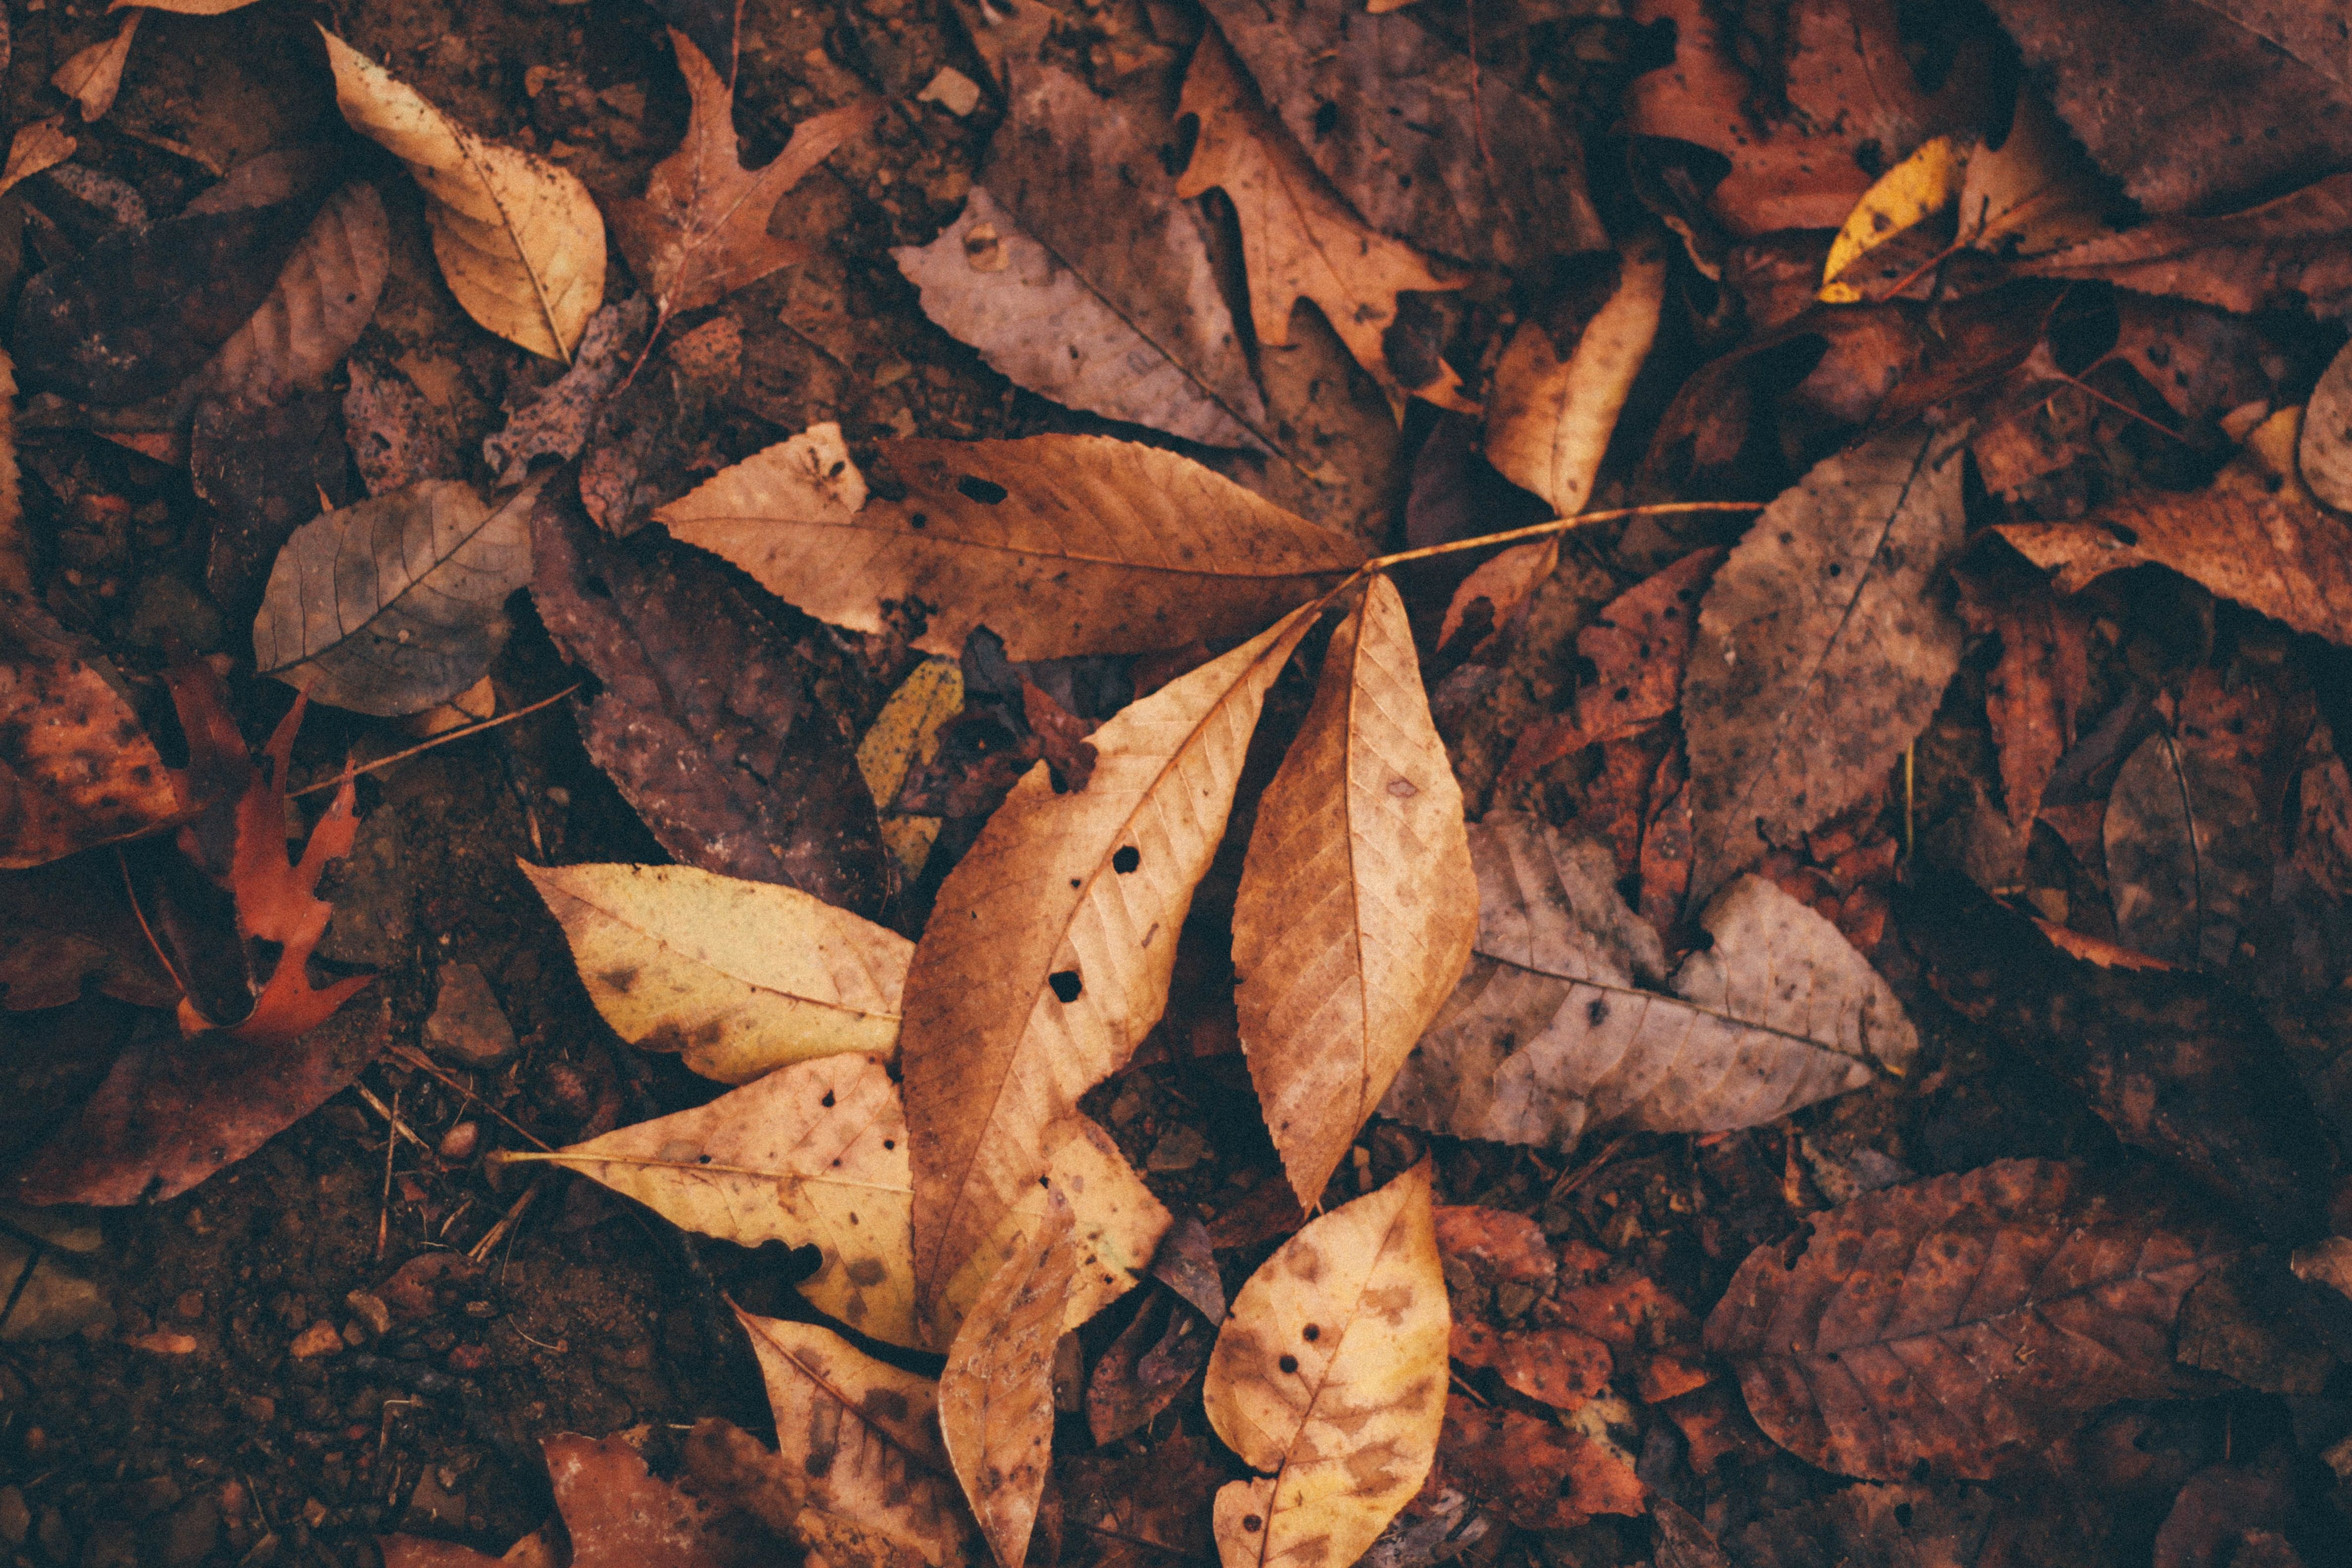 4752x3168 #leaves, #autumn, #ground, #nature, #orange, #leaf, #dry, #red, #forest, #brown, #fall, #tree, #Free image, #leafe. Mocah.org HD Desktop Wallpaper